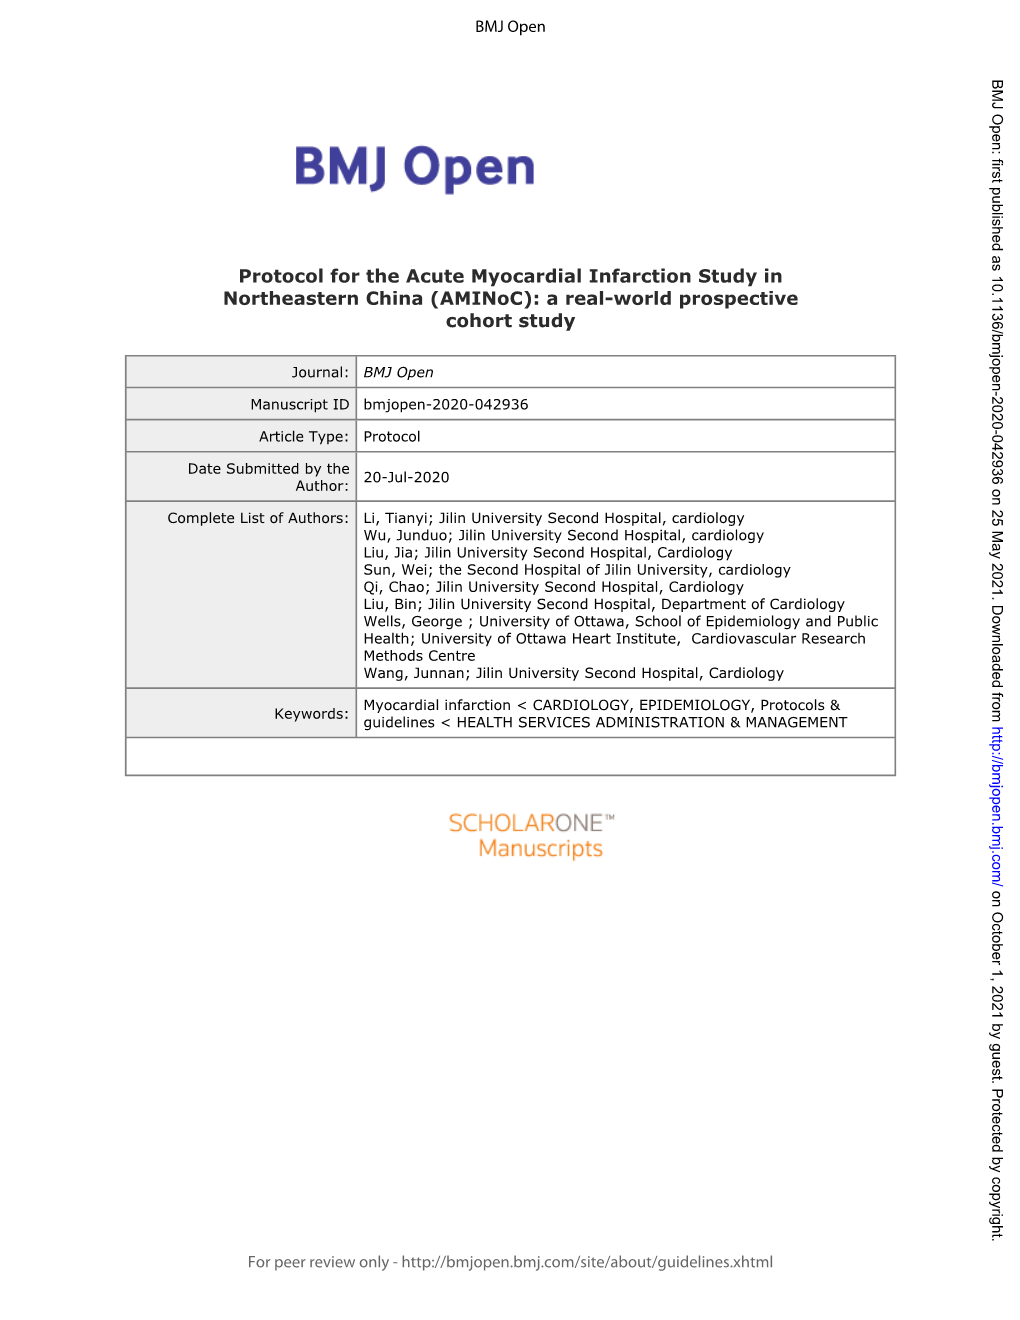 For Peer Review Only - Page 1 of 17 BMJ Open